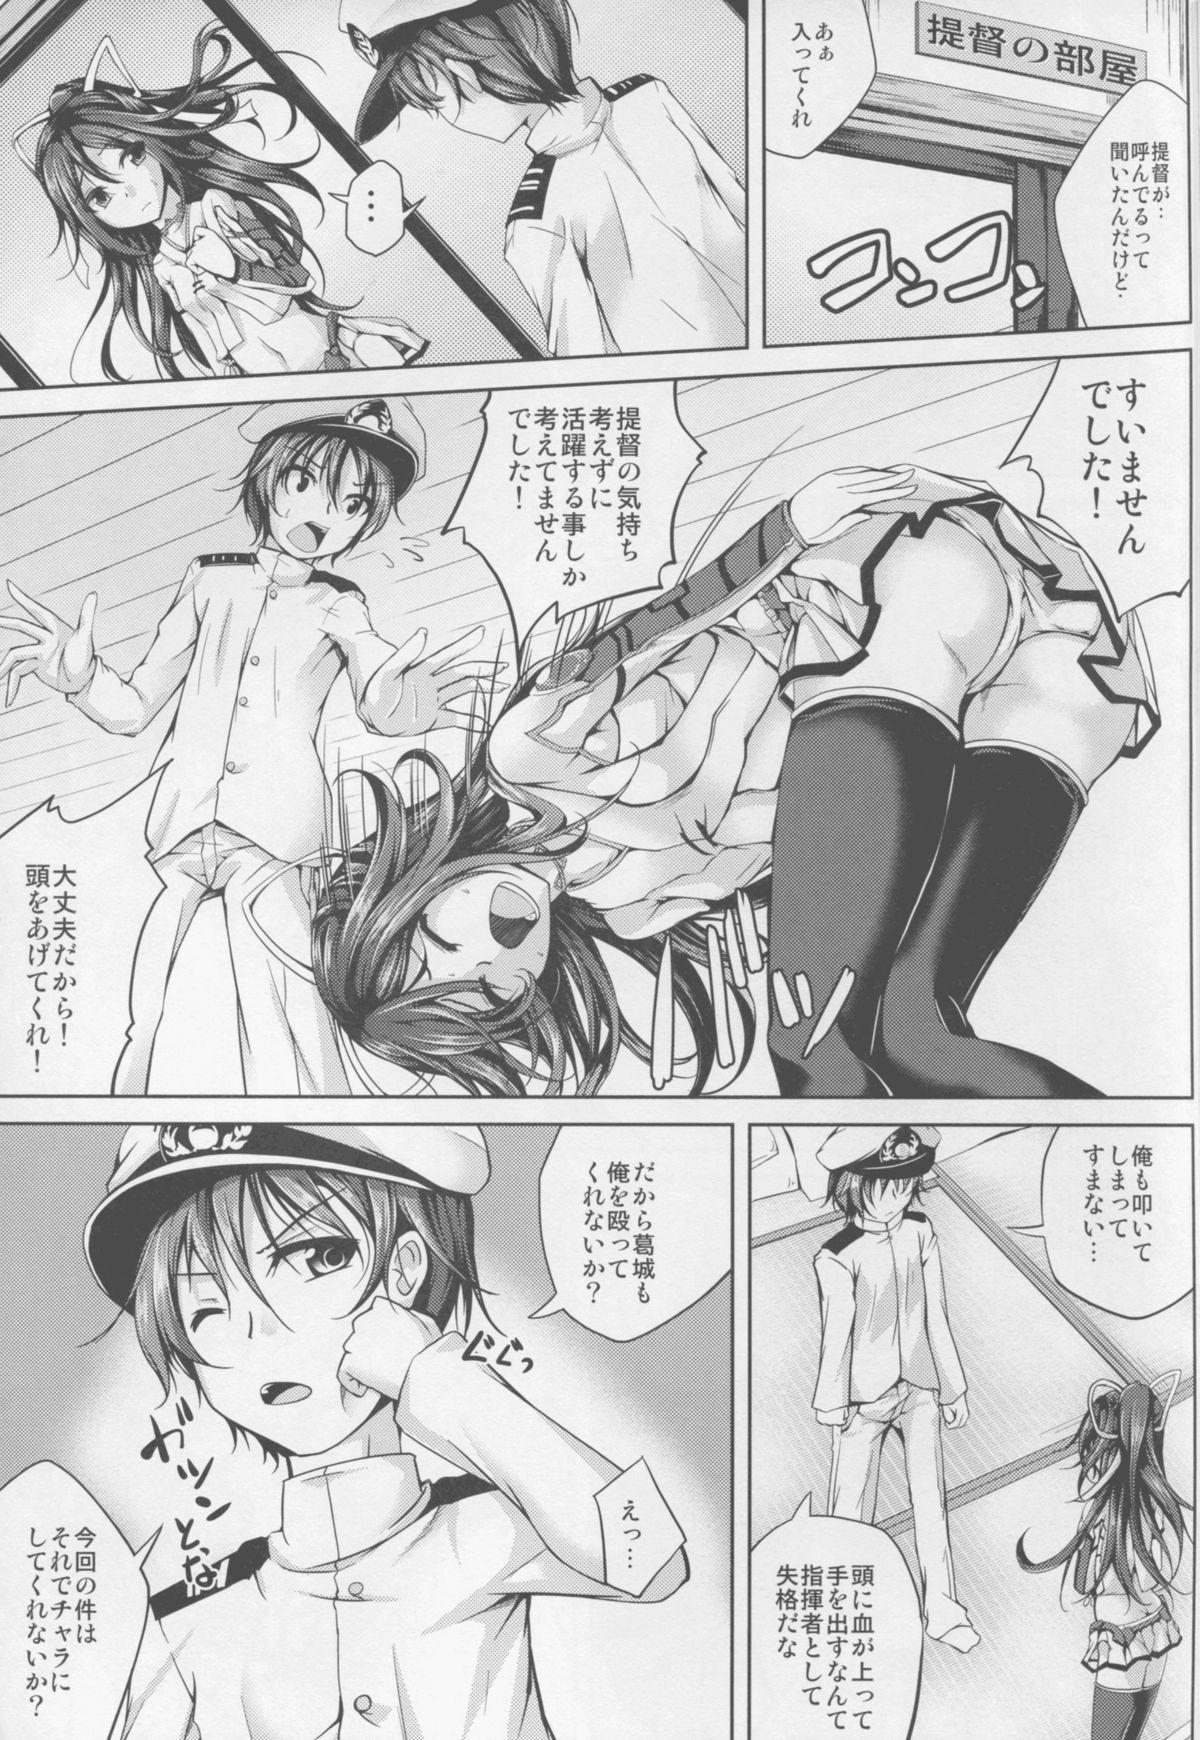 Caught Koiiro Moyou 13 - Kantai collection Cum Swallowing - Page 9